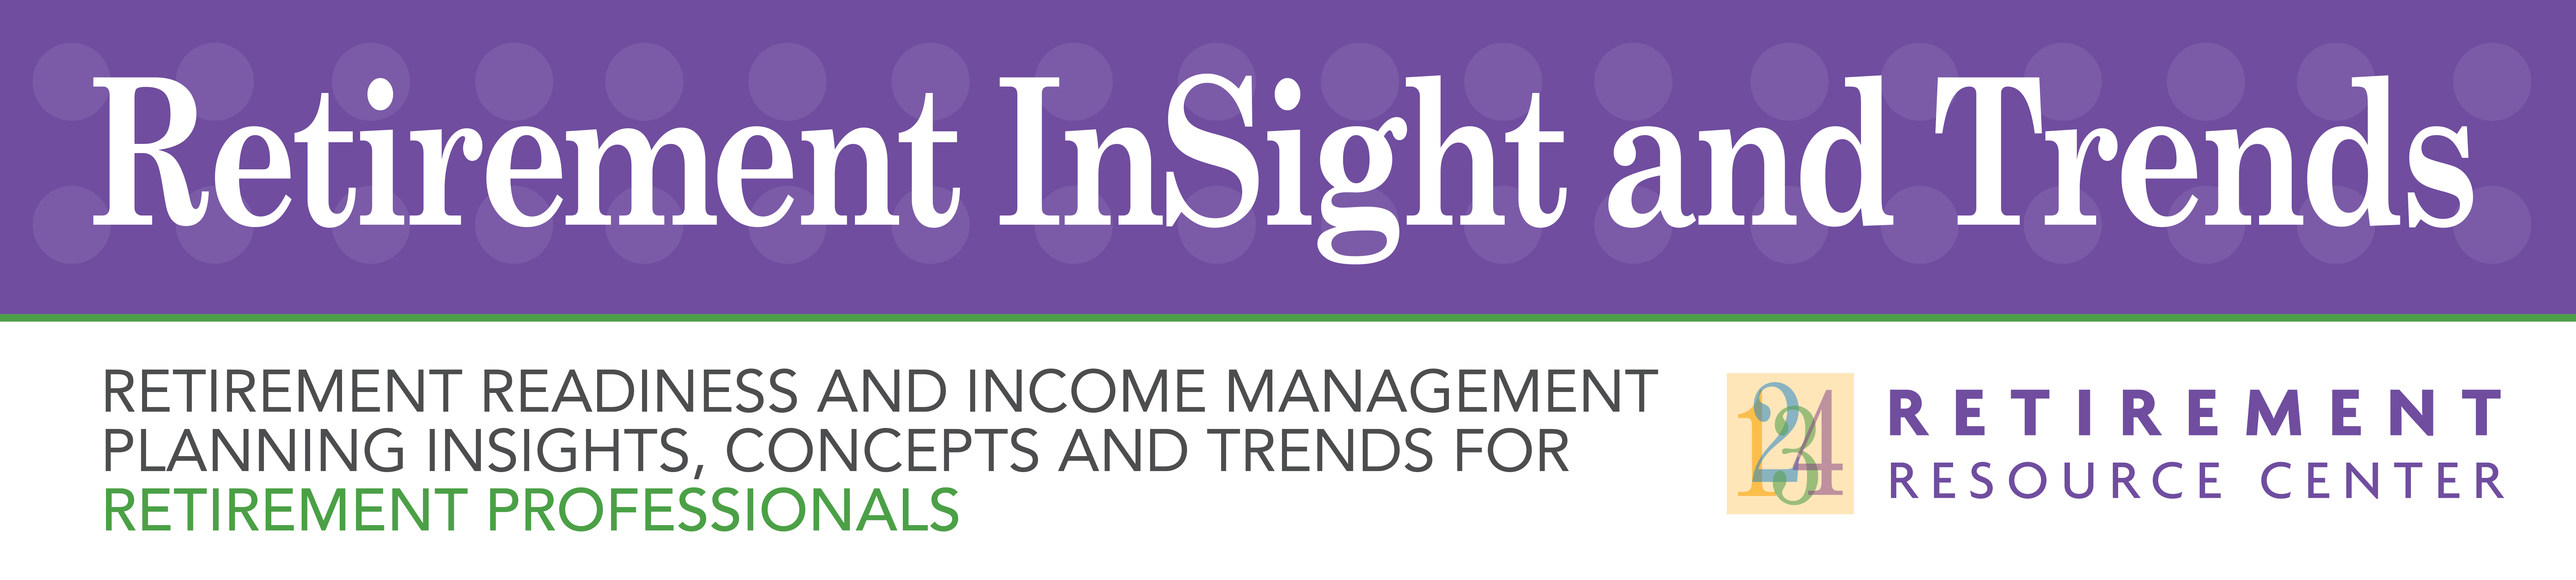 Retirement InSight and Trends